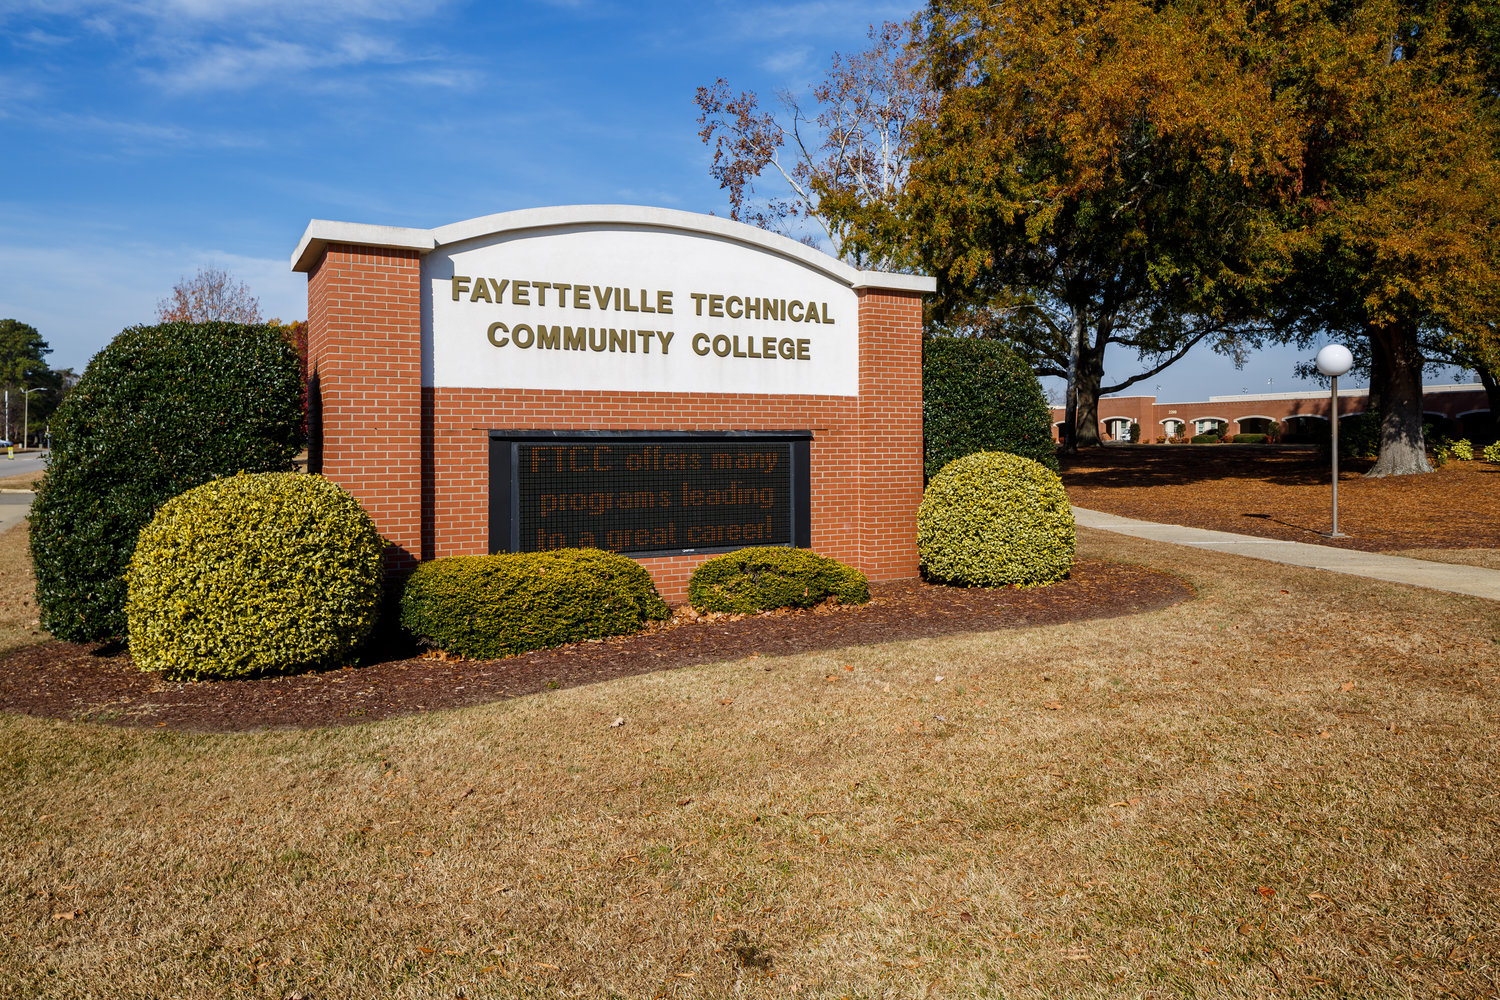 Experts from Red Hat will be at Fayetteville Technical Community College on Thursday to discuss job opportunities and training options in the information technology sector.